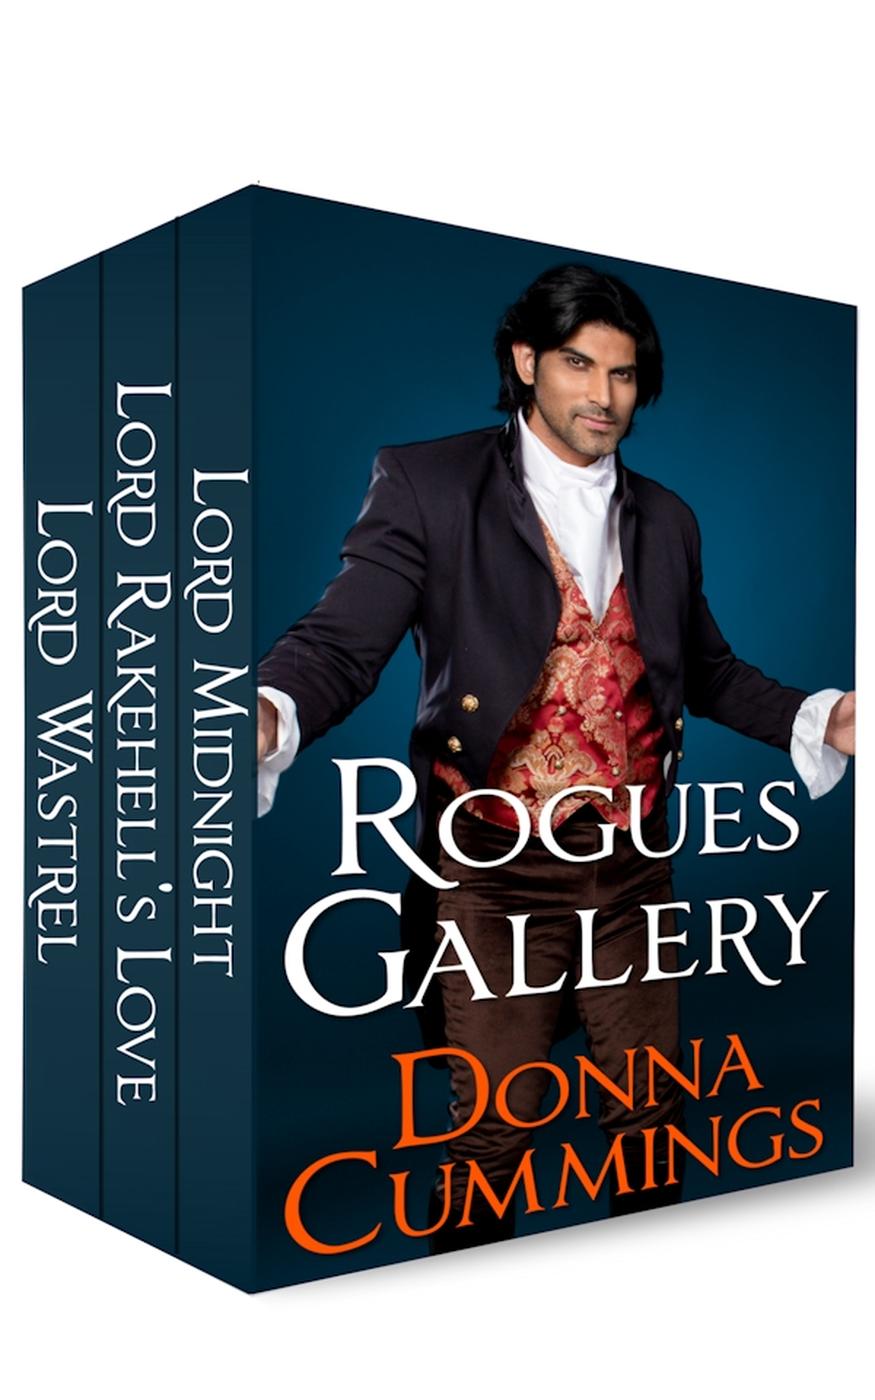 Rogues Gallery by Donna Cummings